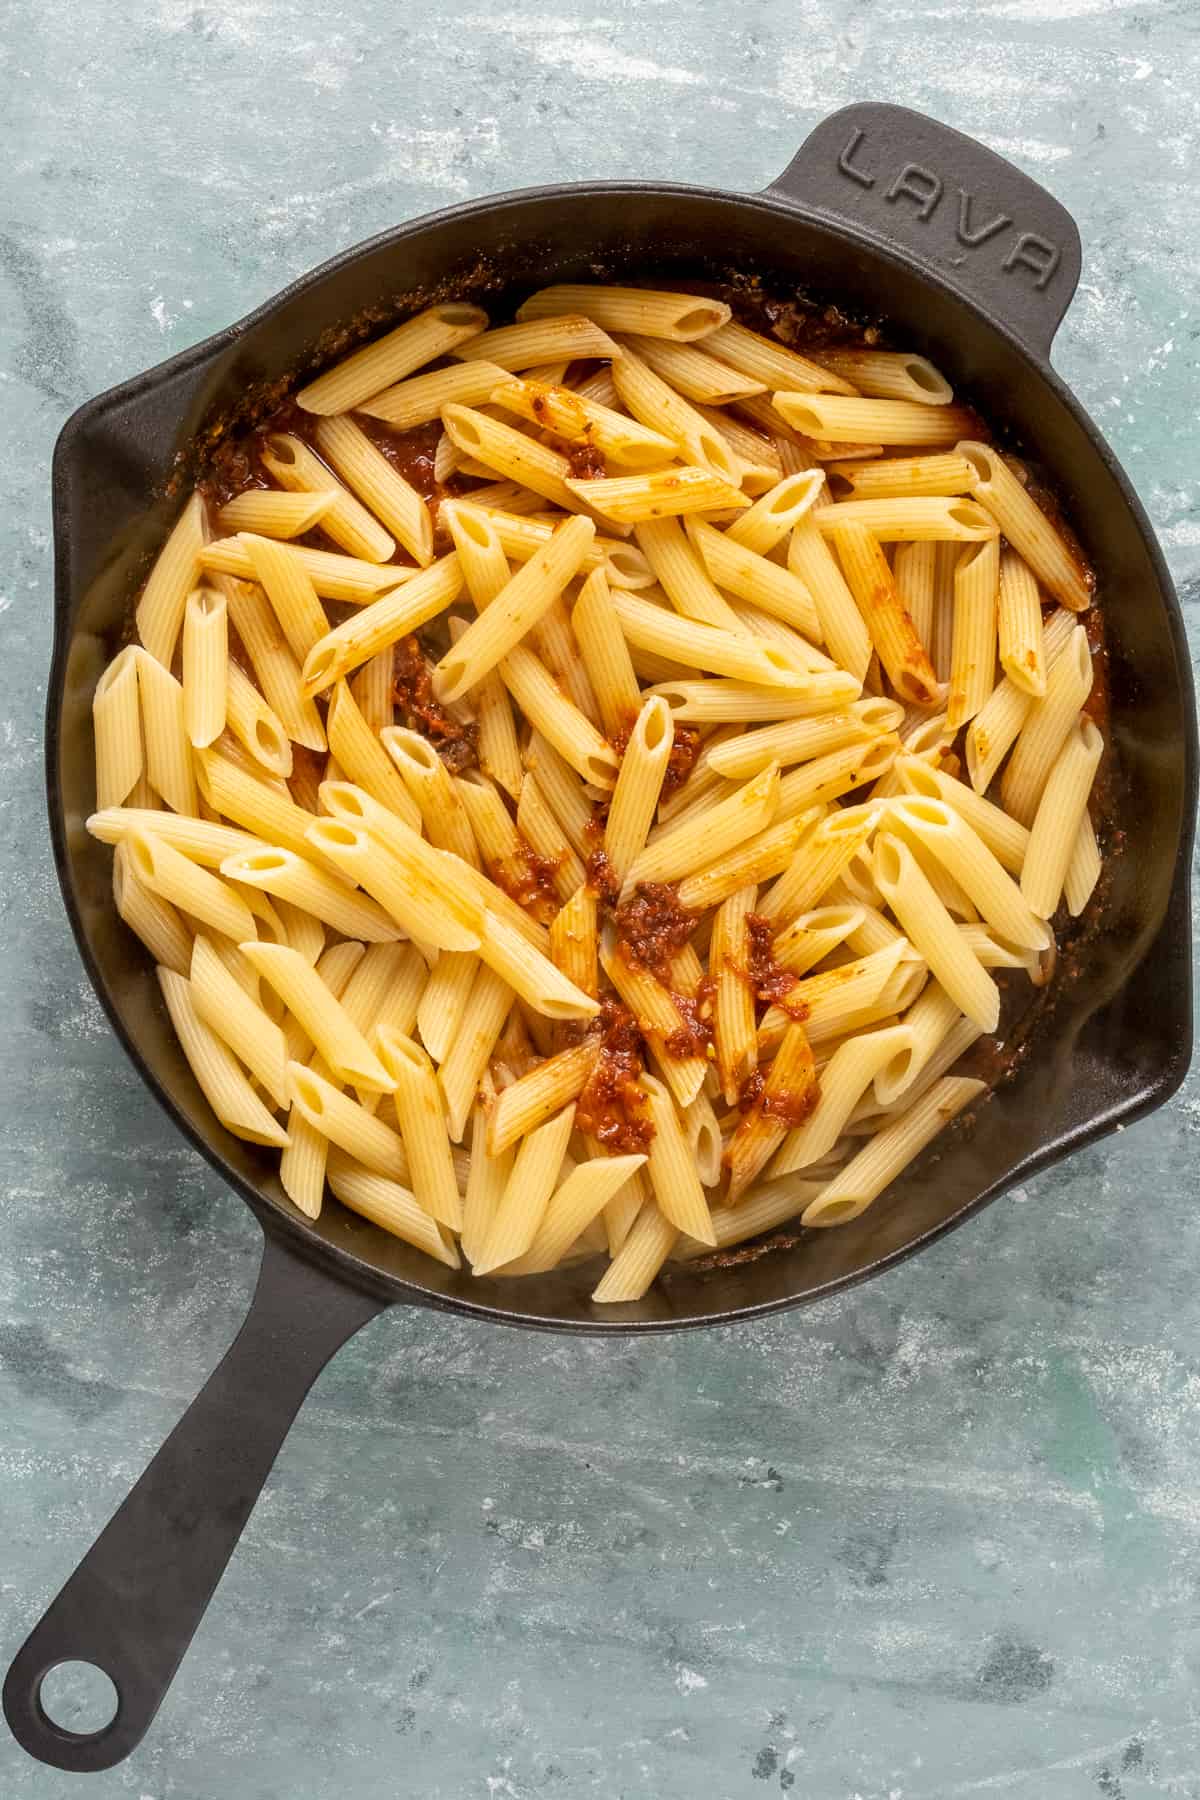 Combining cooked penne pasta with sun-dried tomato sauce in a cast iron skillet.